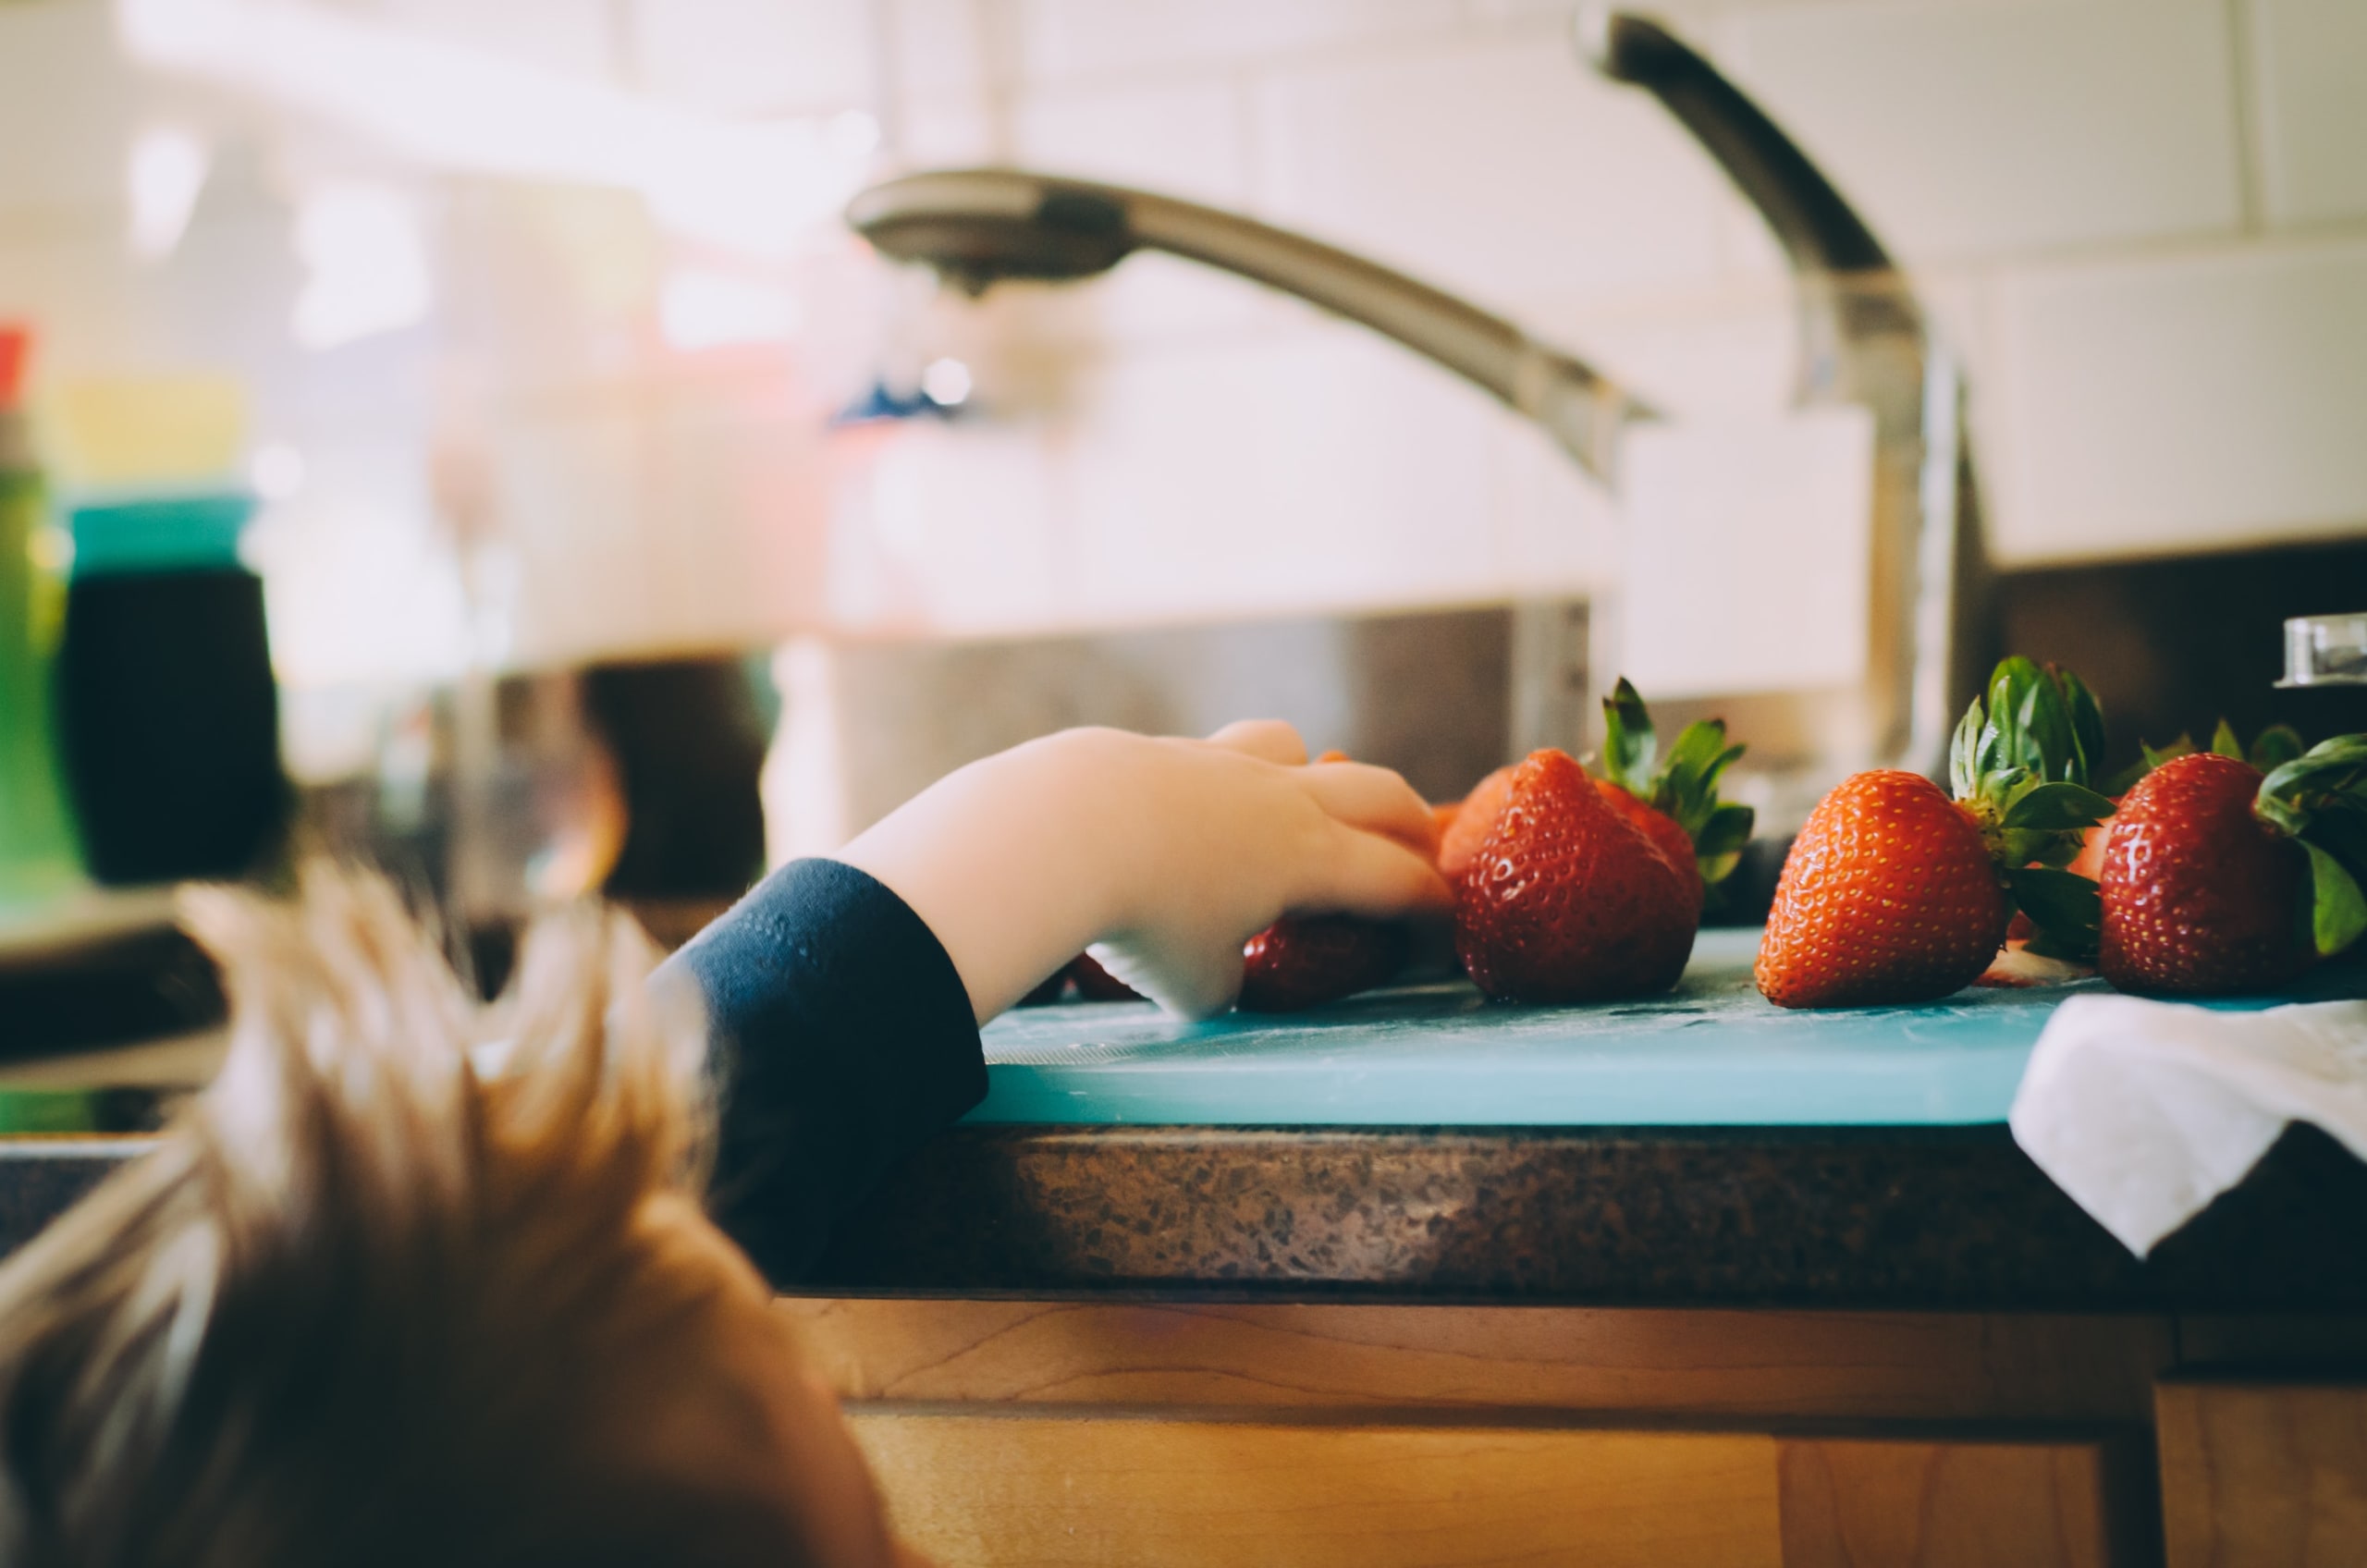 A little boy reaches up to a counter to reach for strawberries. There is a sink beside him.